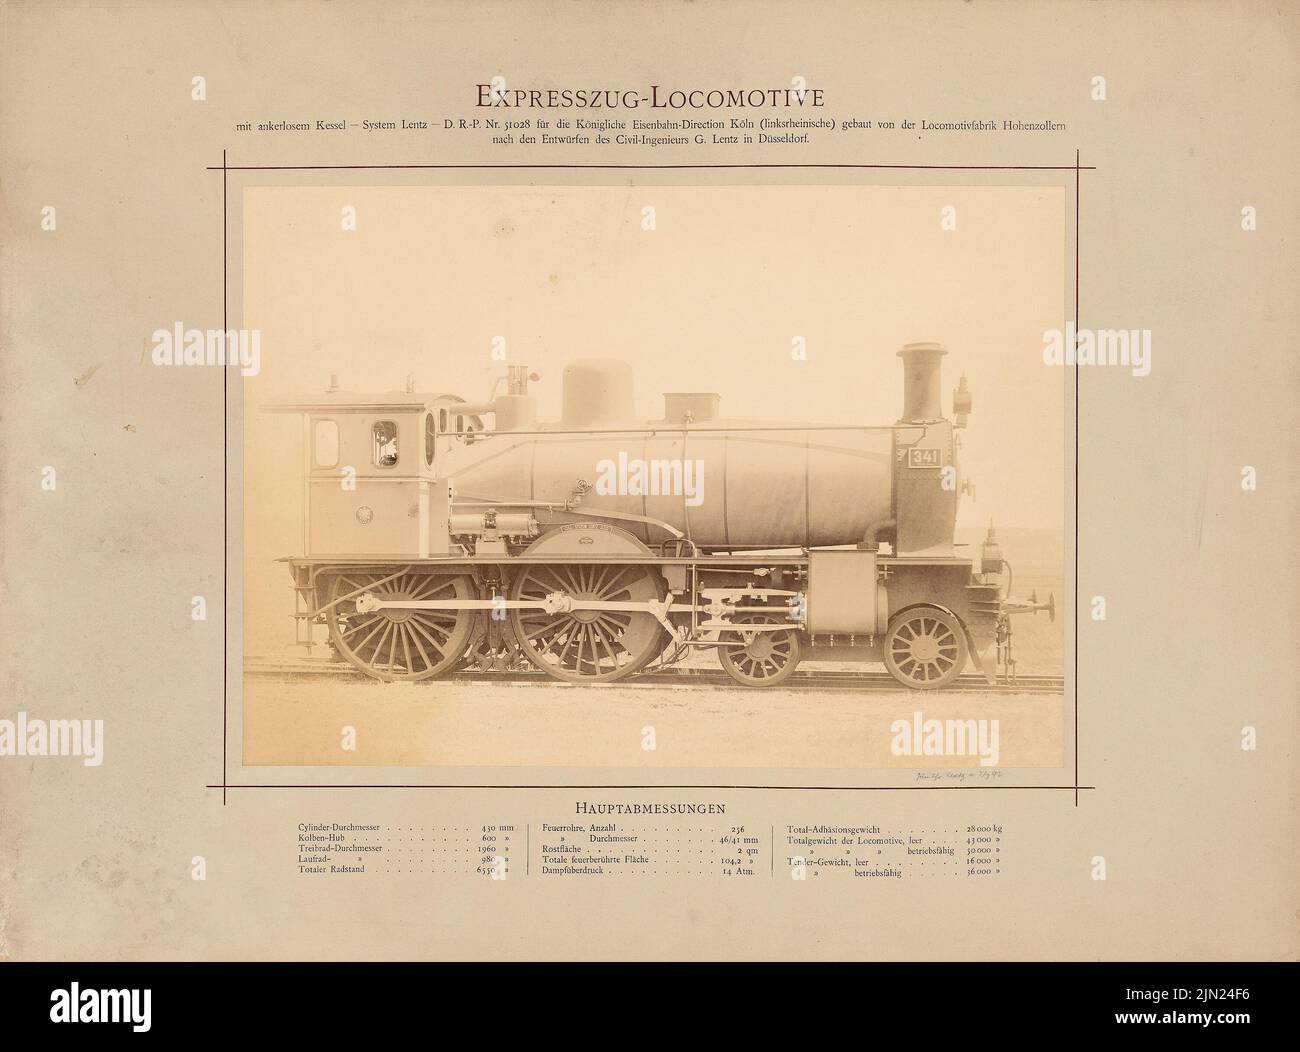 Lentz G., Express Zuglokomotive for the Royal Railway Directorate Cologne (without Dat.): View: With anchorless boiler, D.R.-P-No. 51028, built by the Hohenzollern locomotive factory. Photo on cardboard, 48.1 x 65 cm (including scan edges) Stock Photo